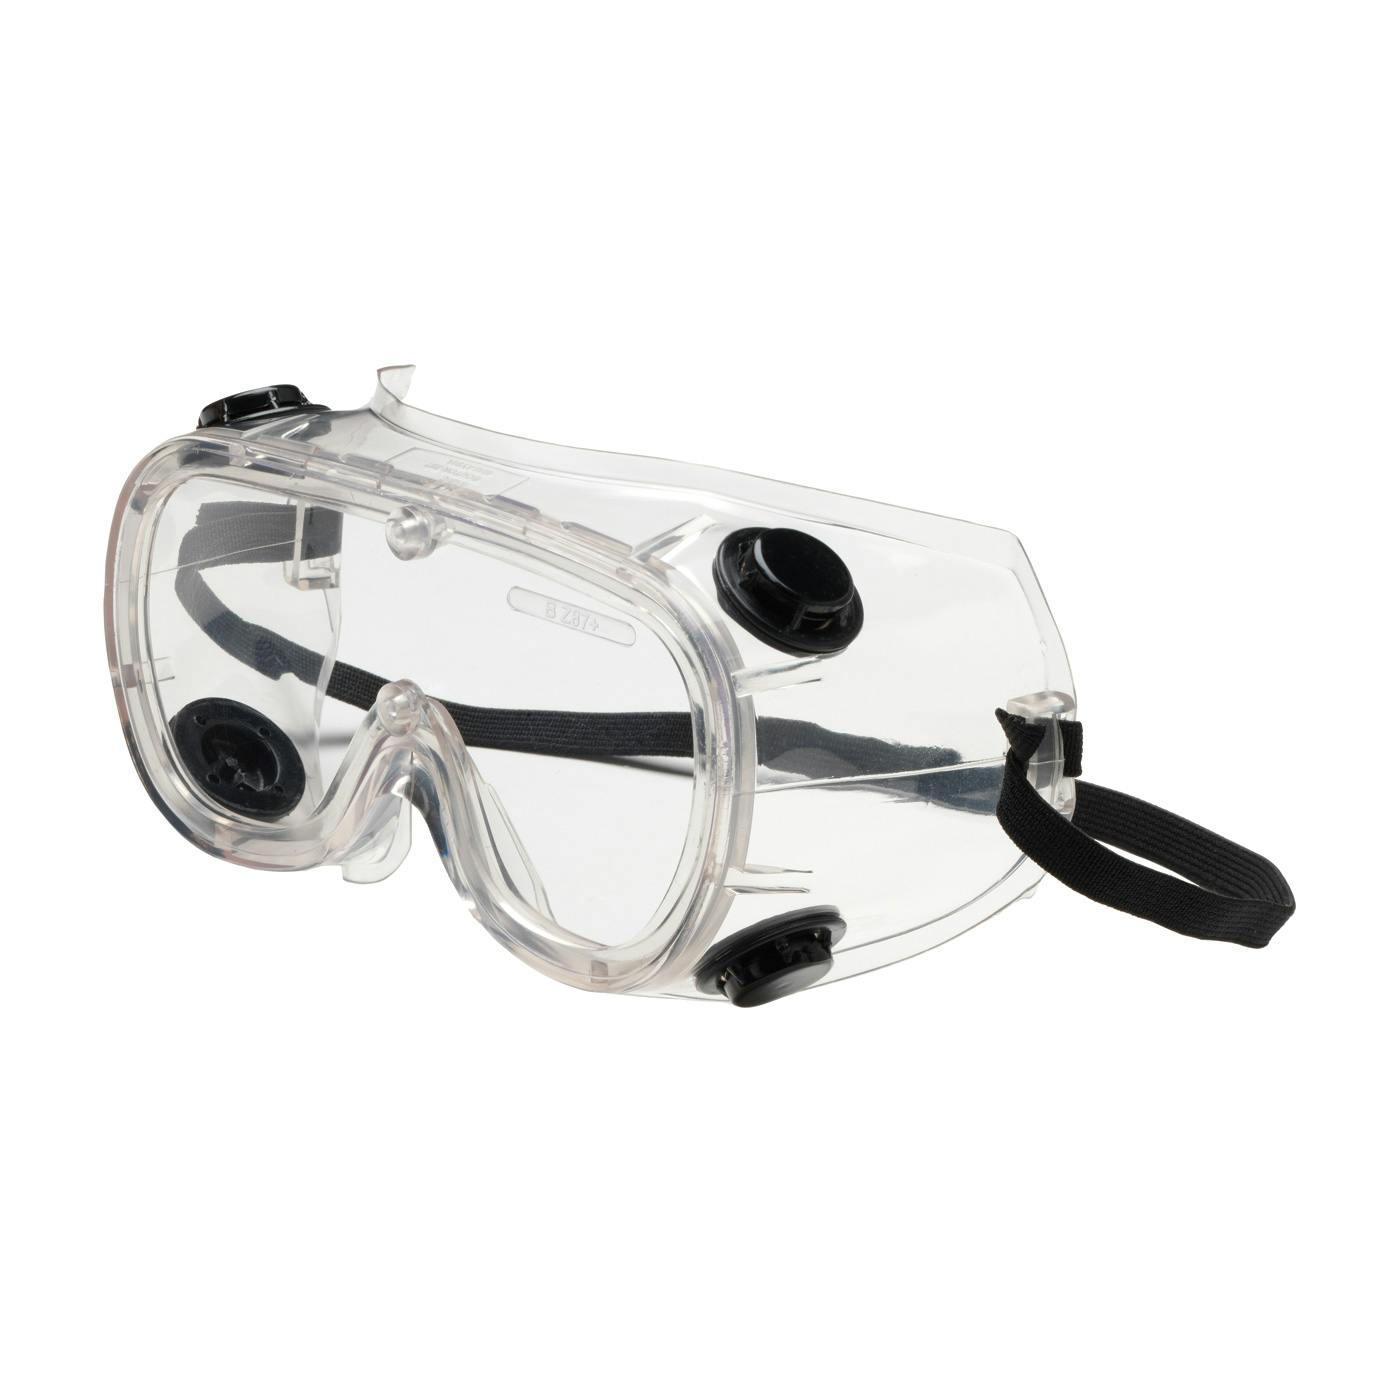 Indirect Vent Goggle with Clear Body, Clear Lens and Anti-Scratch / Anti-Fog Coating, Clear (248-4401-400) - OS_0